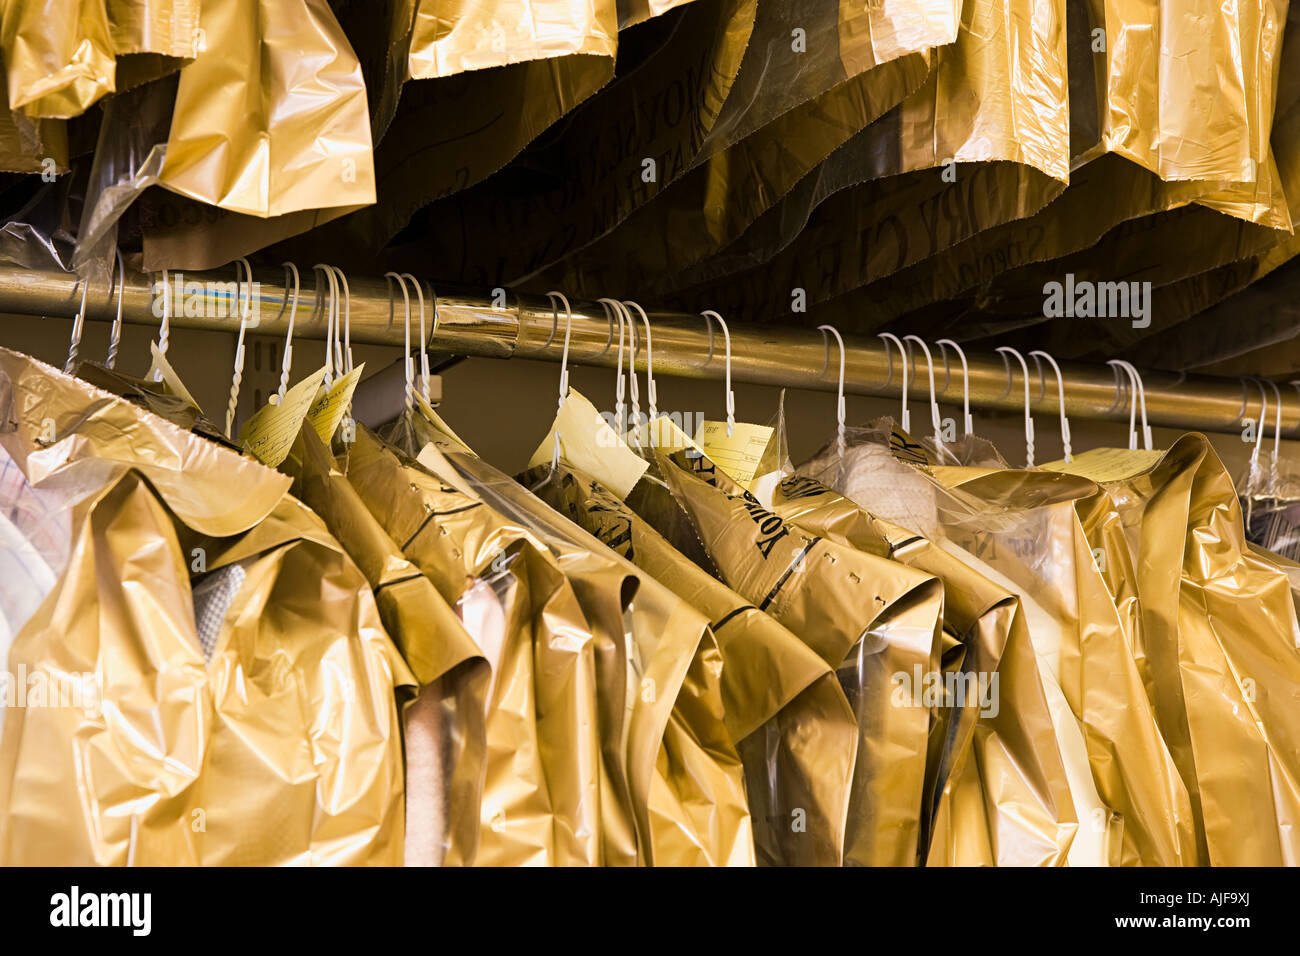 Dry cleaning hanging on a clothes rail Stock Photo